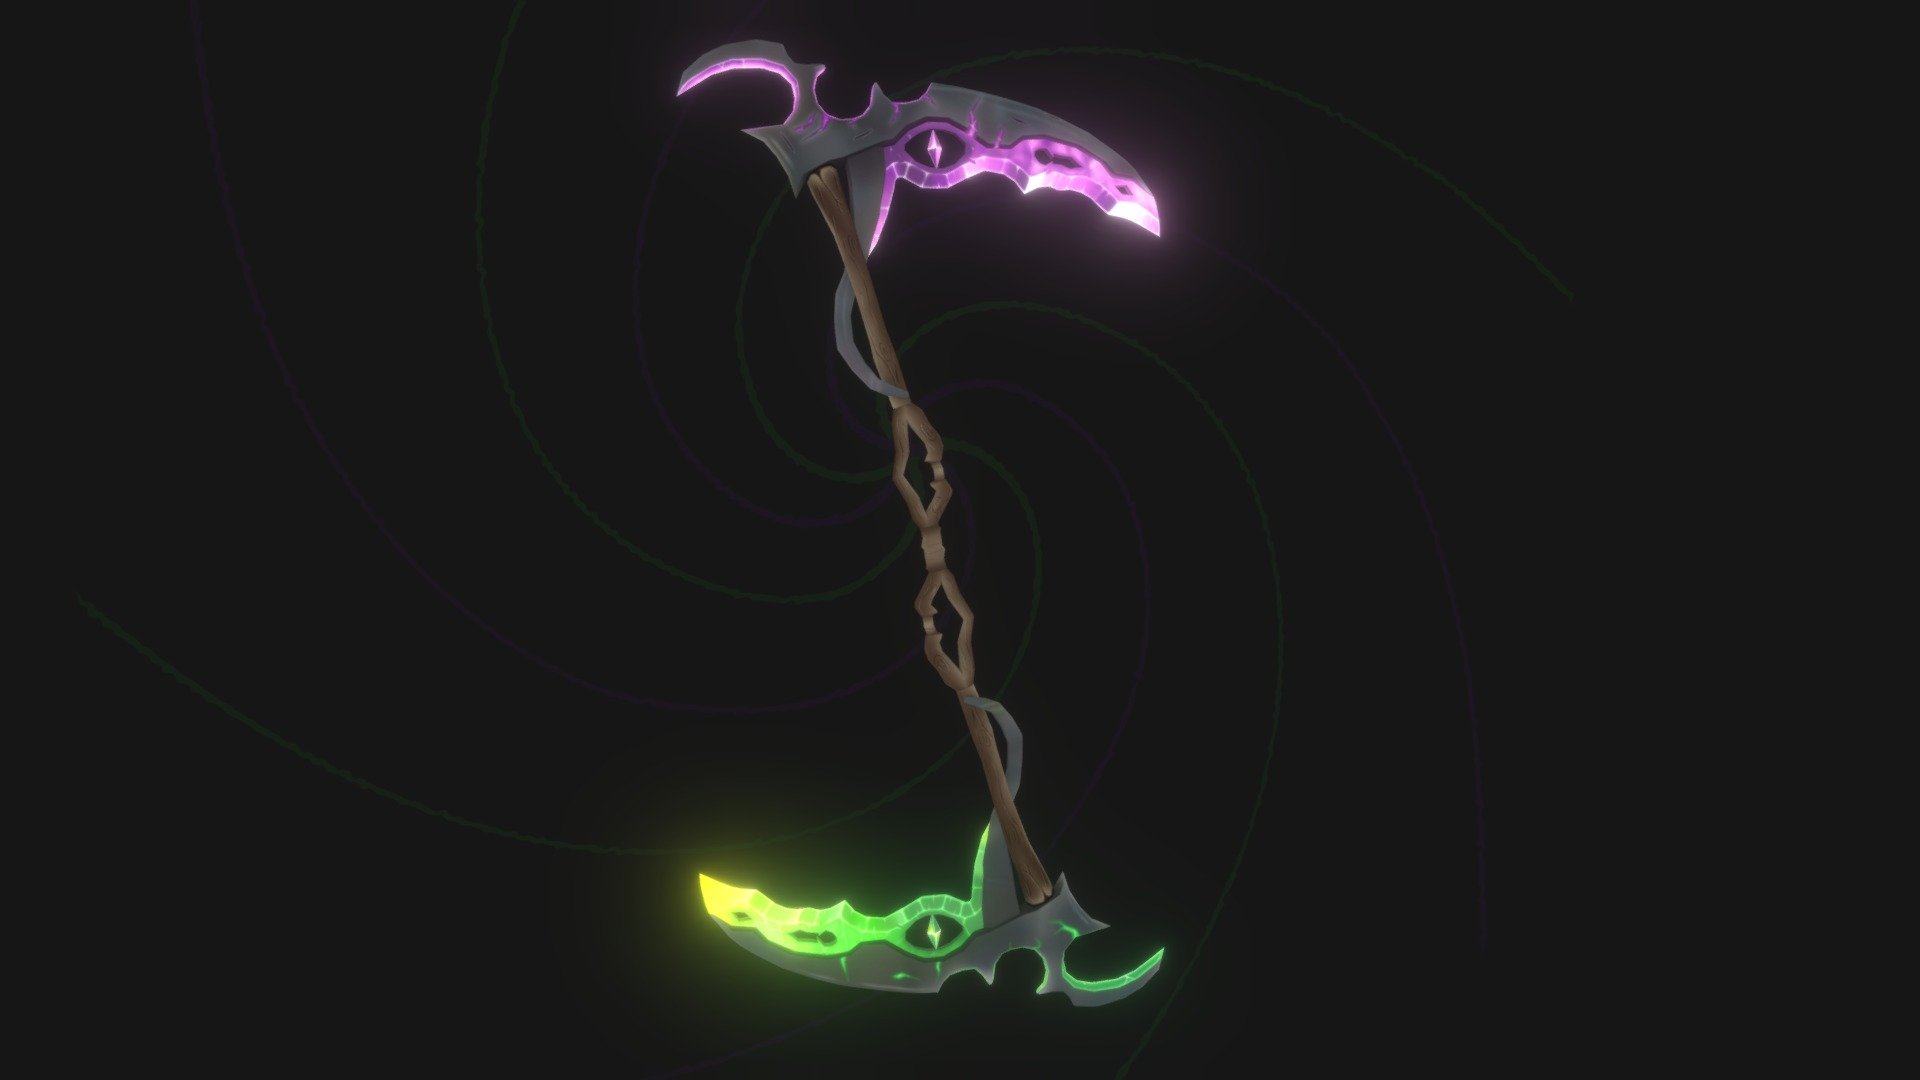 &ldquo;A humble blacksmith crafted a scythe for a farmer, unaware of the powerful artifact it would become. Years later, warrior named Rhea imbued the scythe with her magical powers, transforming it into the crystal snake scythe. As she wielded it in battle, Rhea's powers infused the scythe with the ability to poison her enemies on one side and hypnotize them on the other. The scythe became a part of her, an extension of her will and power, and the legend of the crystal snake scythe was born. Its powers were granted not by gods or ancient sorcery, but by the strength and skill of its wielder.